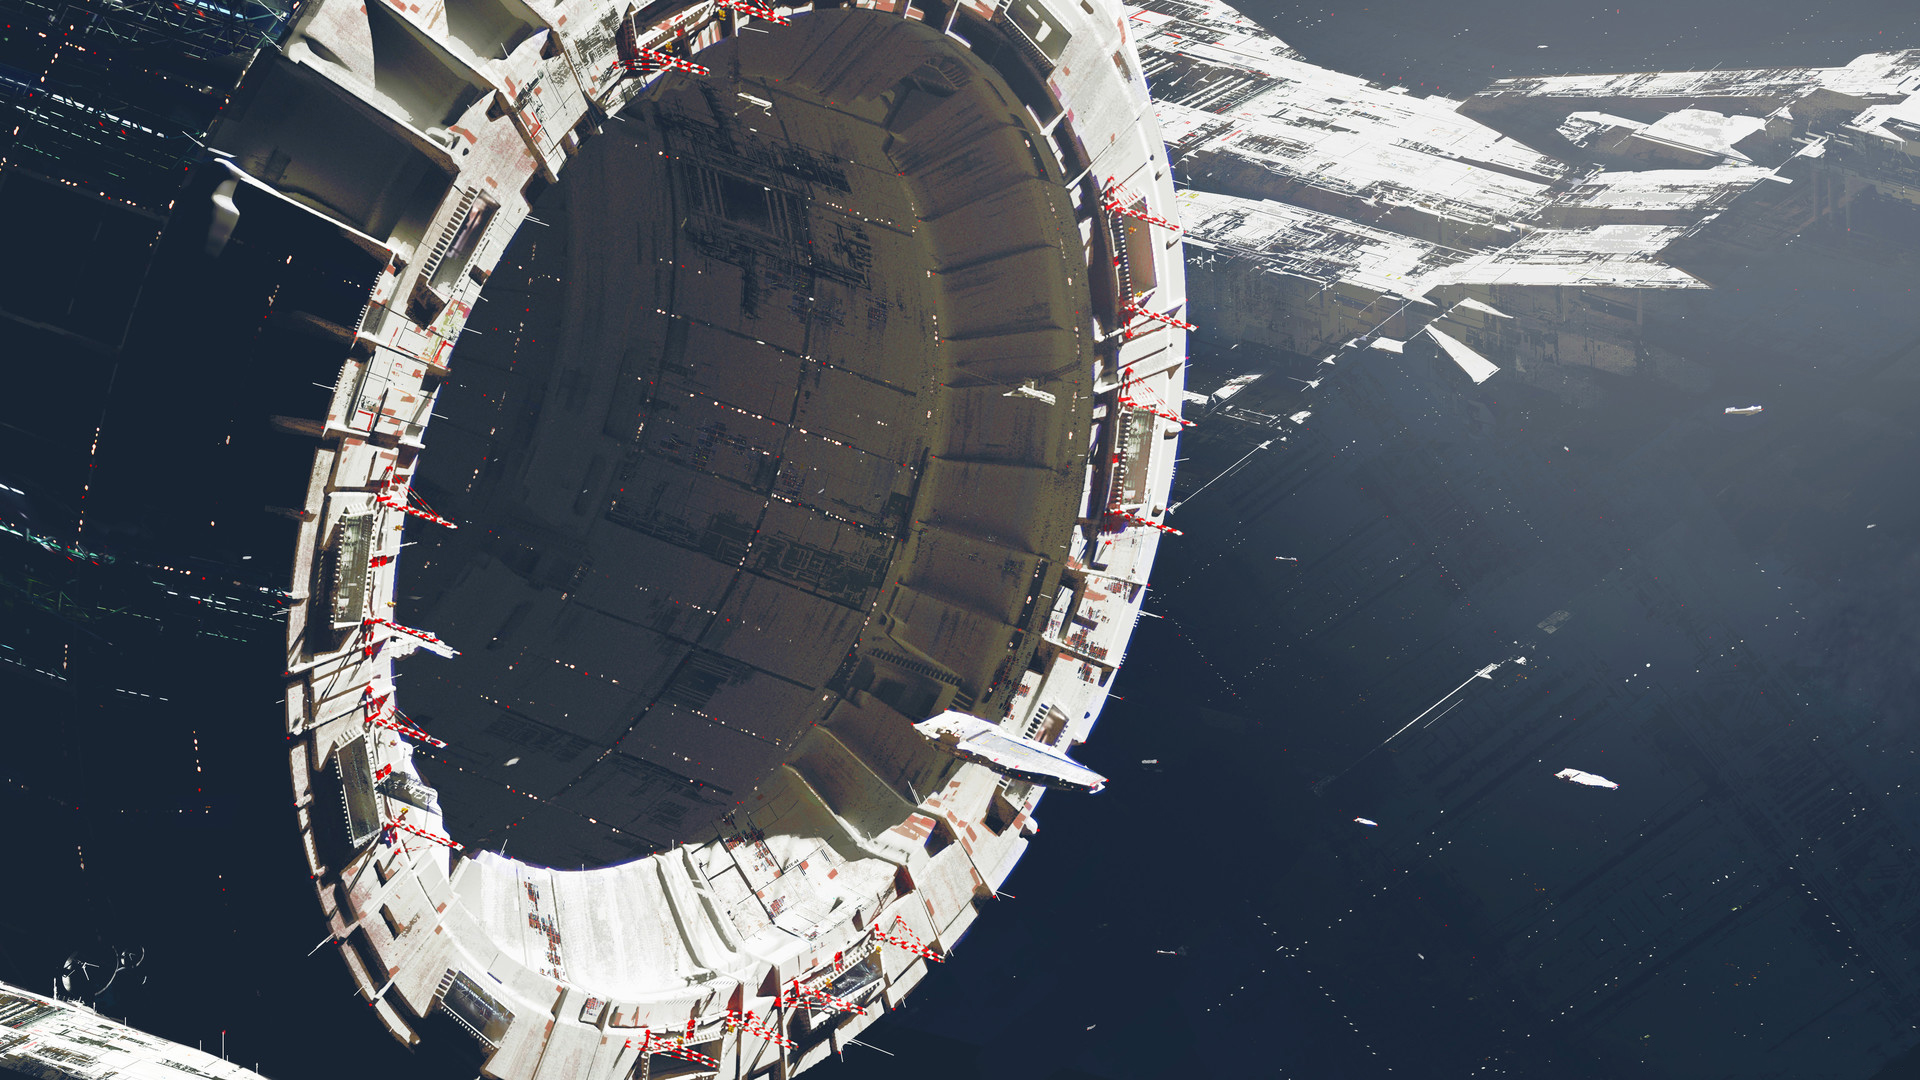 General 1920x1080 science fiction space futuristic space station Paul Chadeisson